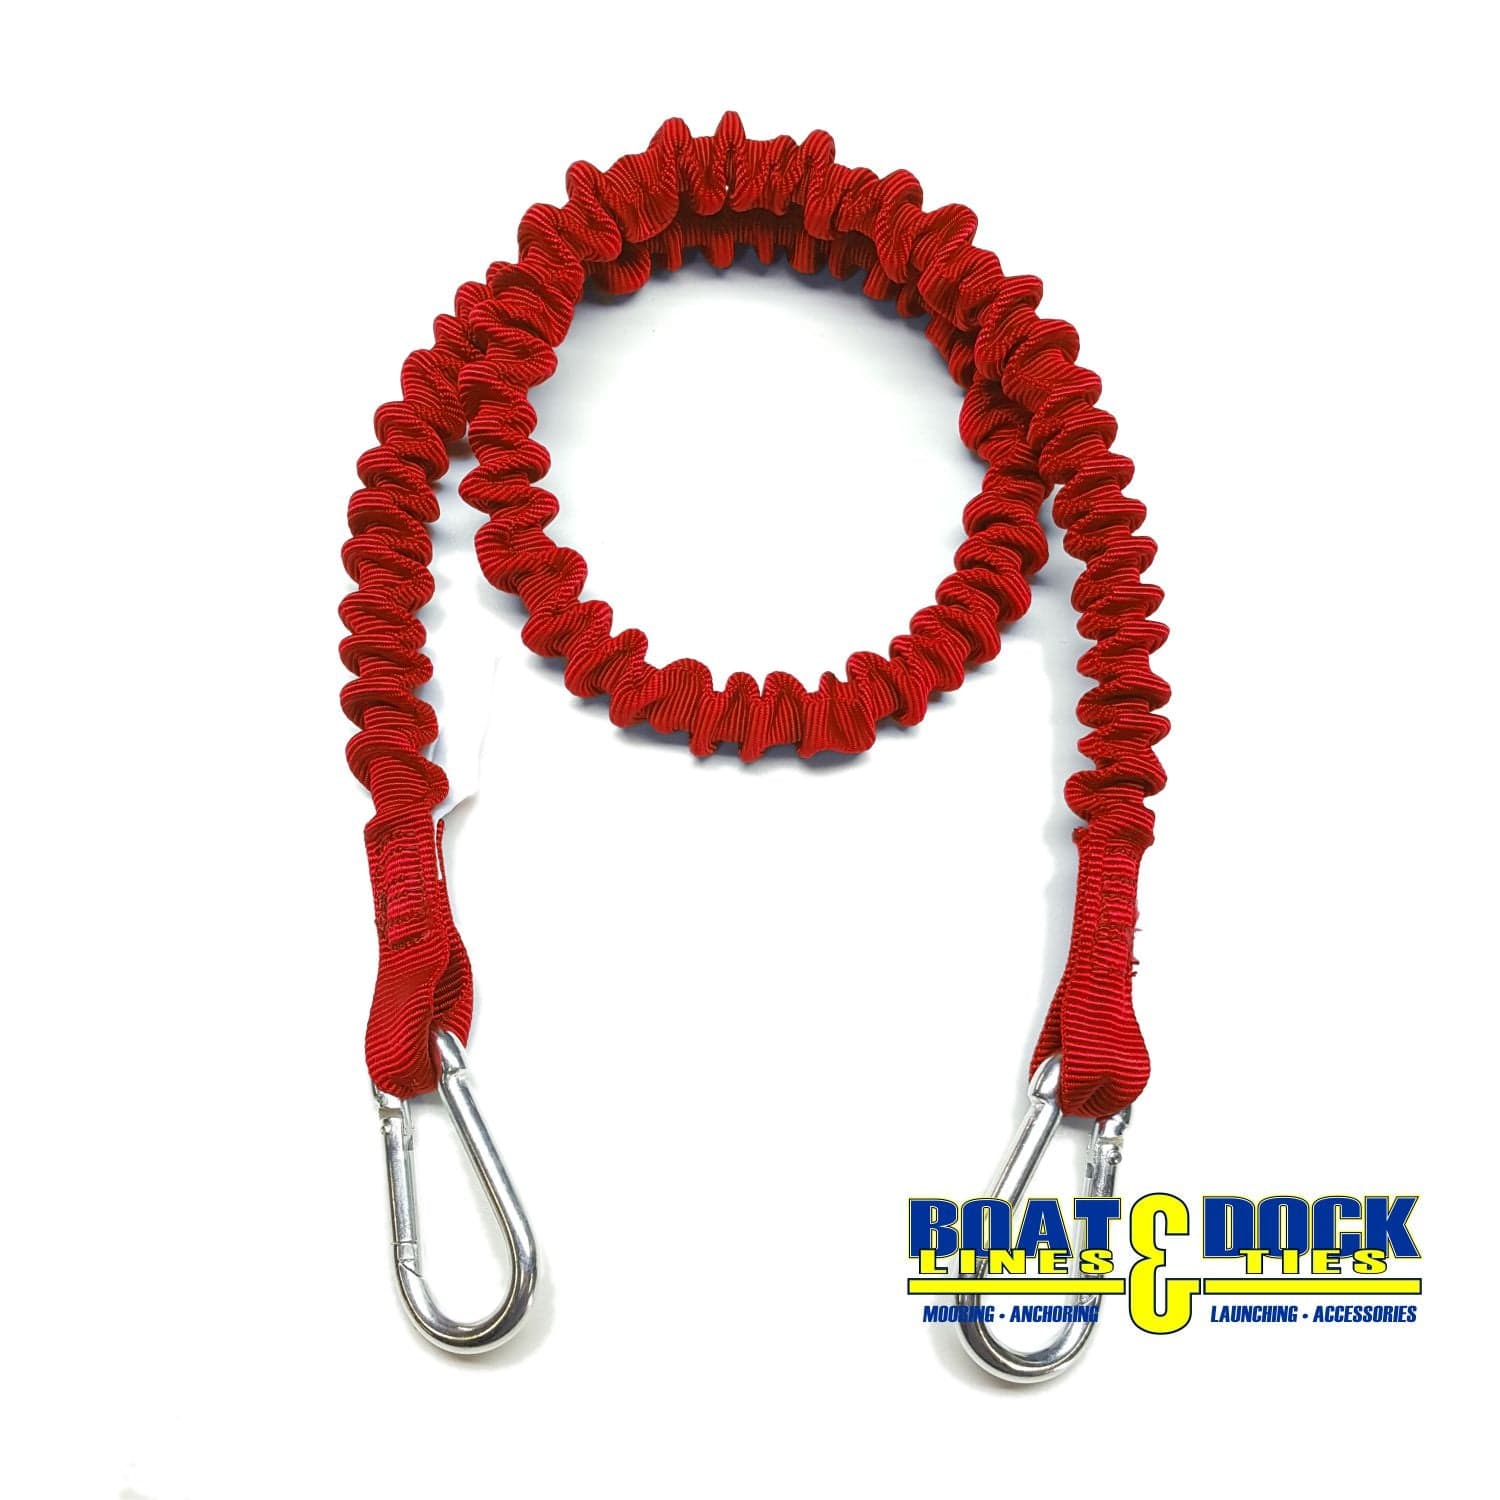 Boat Dock Tie Bungee Cords, 2 Hooked Ends, UV Protected Bungee Cords - Set of 2 - Made in USA - Boat Lines & Dock Ties Boat Lines & Dock Ties 48" / Red